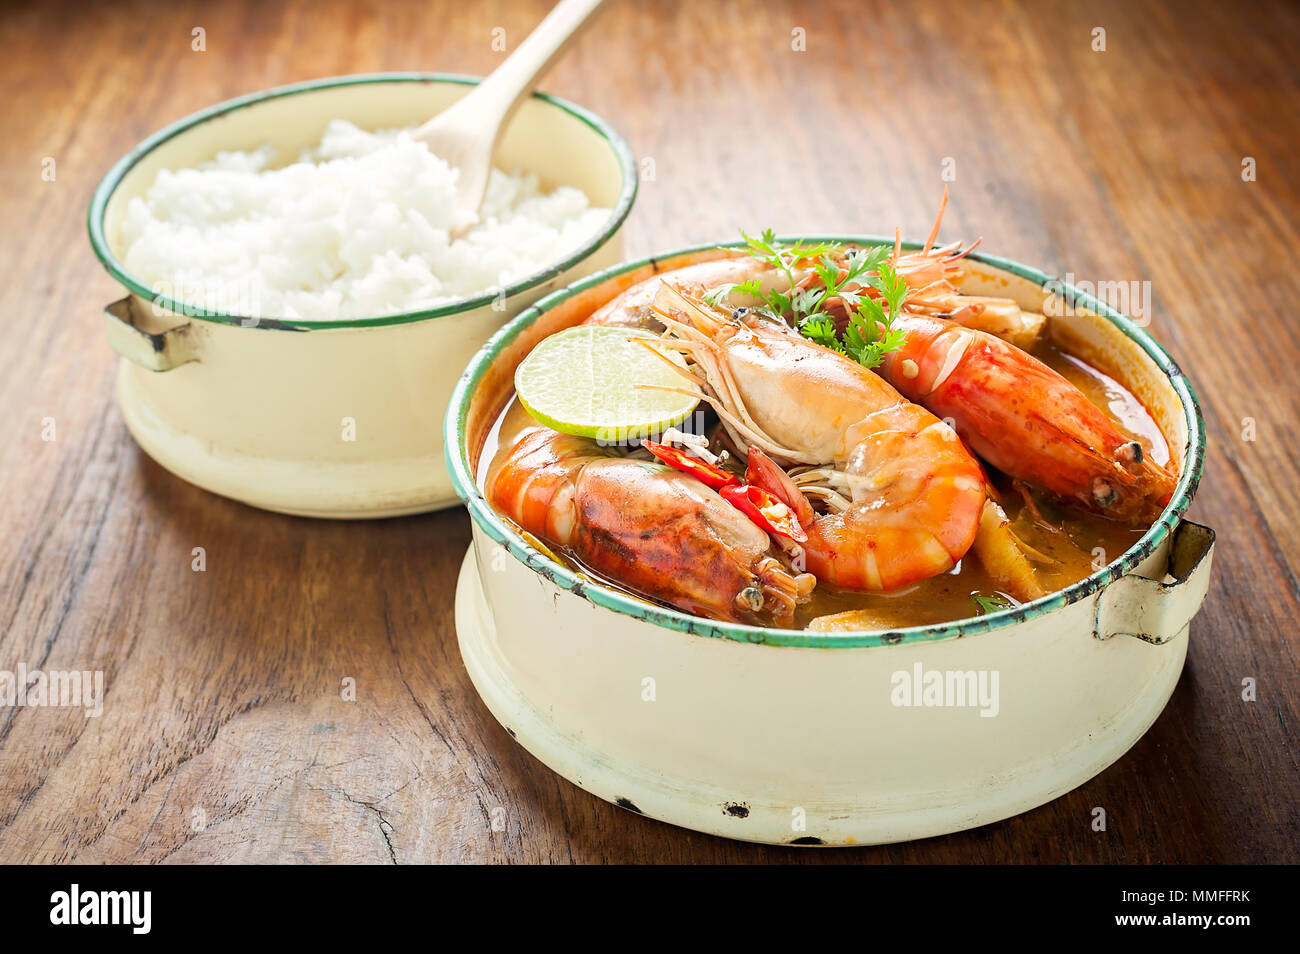 Thai food, River prawn spicy soup or tom yum goong on wooden table Stock Photo